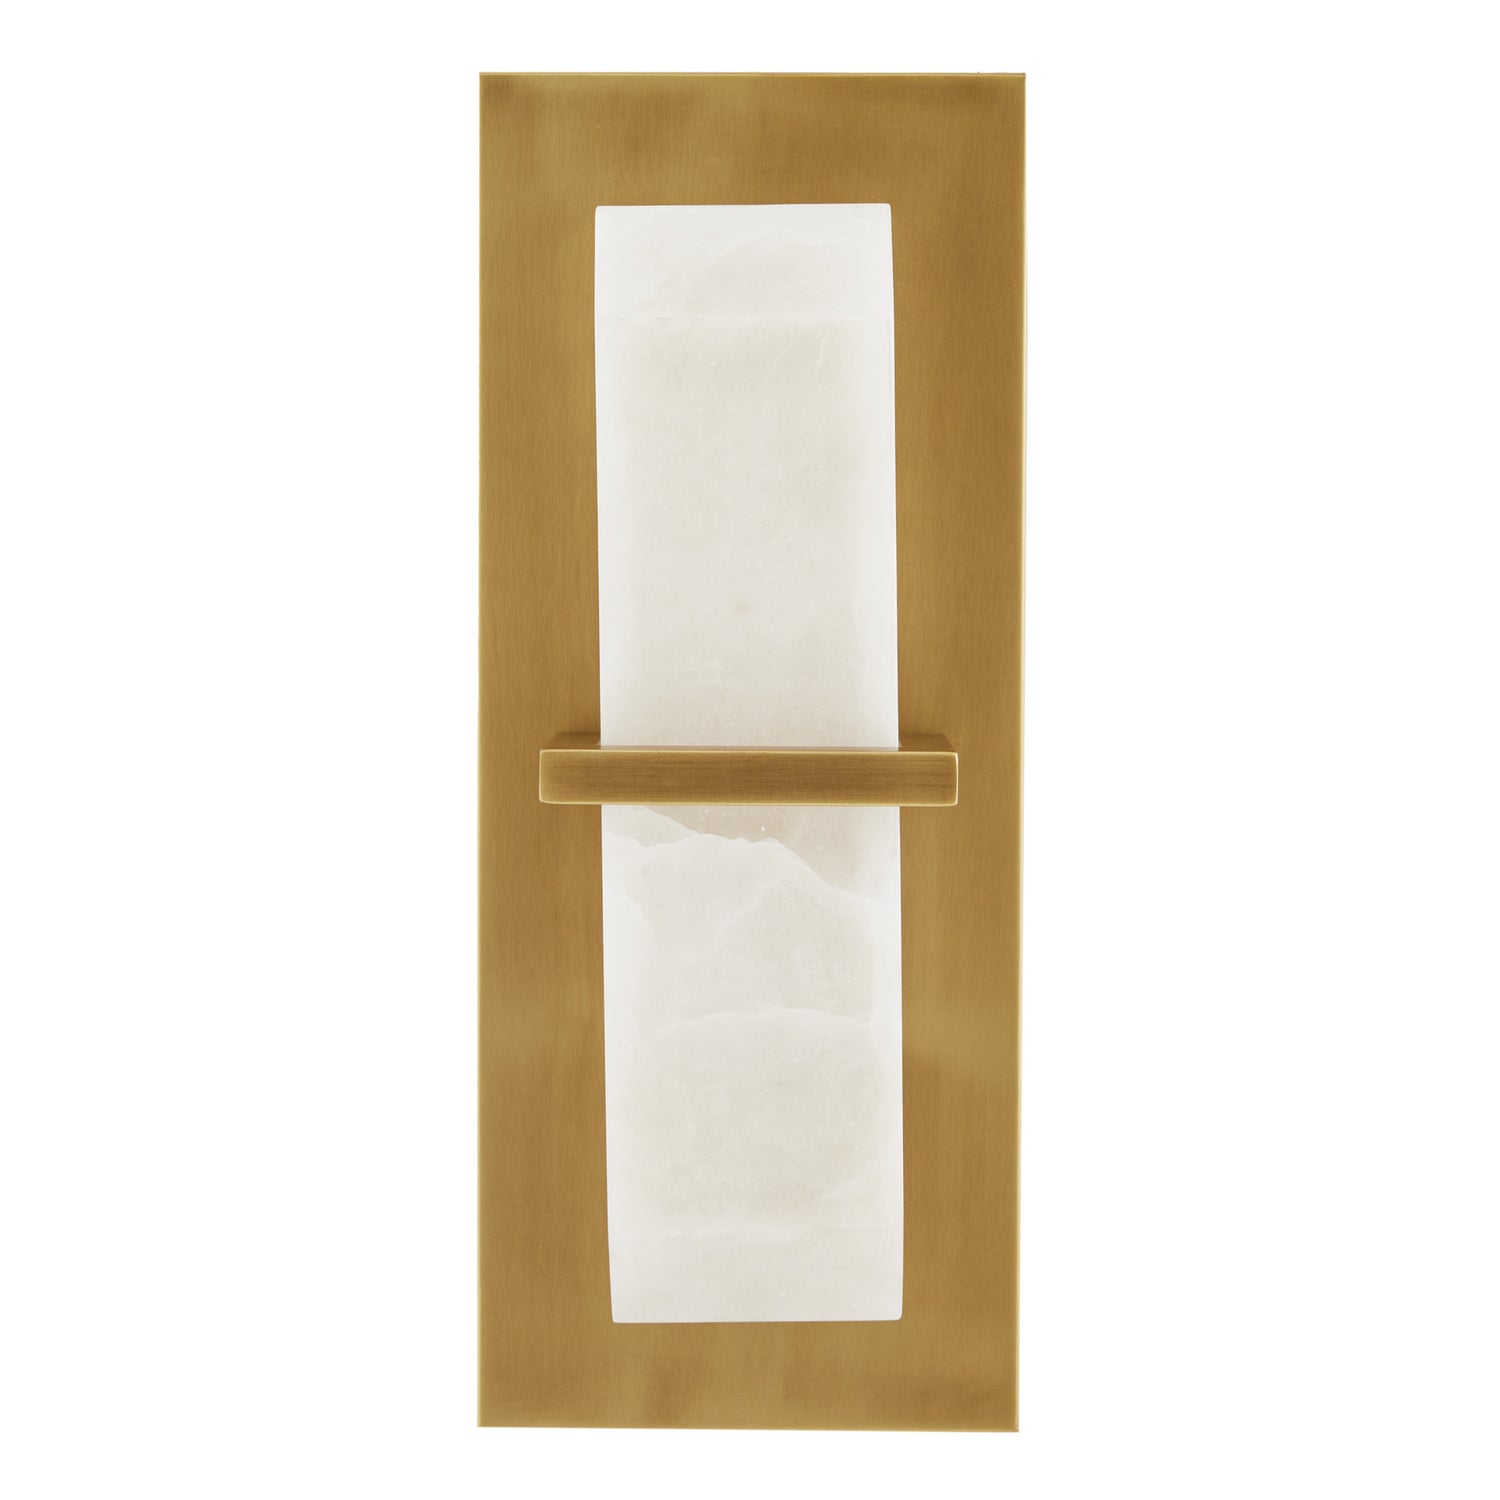 Two Light Wall Sconce from the Redmond collection in Antique Brass finish